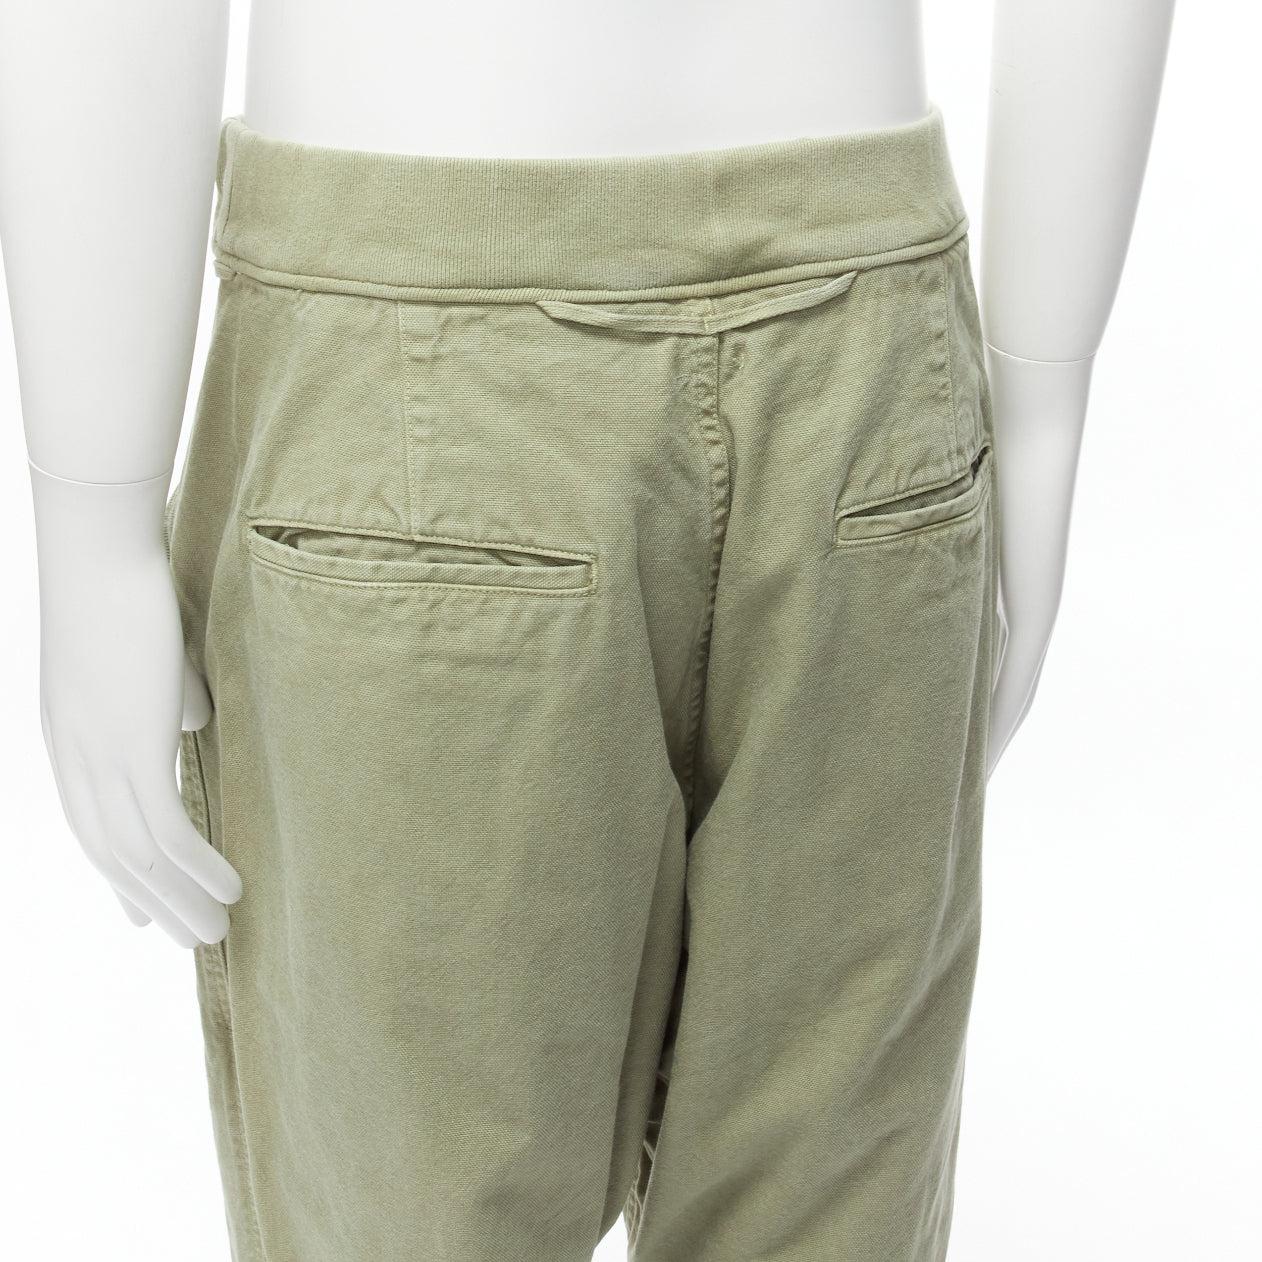 KAPITAL 100% washed cotton green distressed buttons elasticated waist pant JP3 L For Sale 3